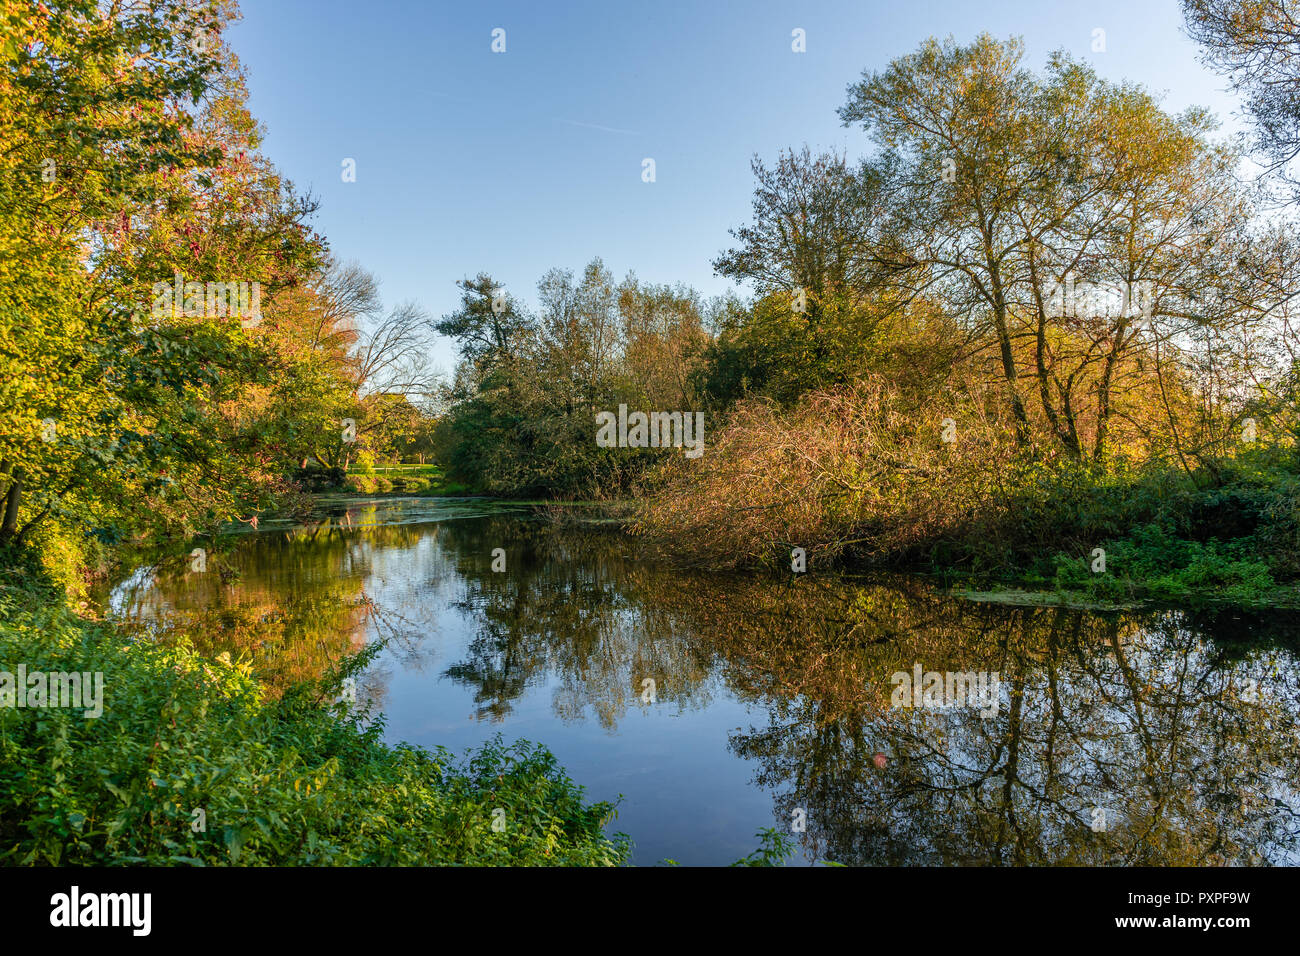 Scenic view along Stour Valley Way with autumnal trees reflected in the Stour river during a sunny day in October 2018, Dorset, England, UK Stock Photo